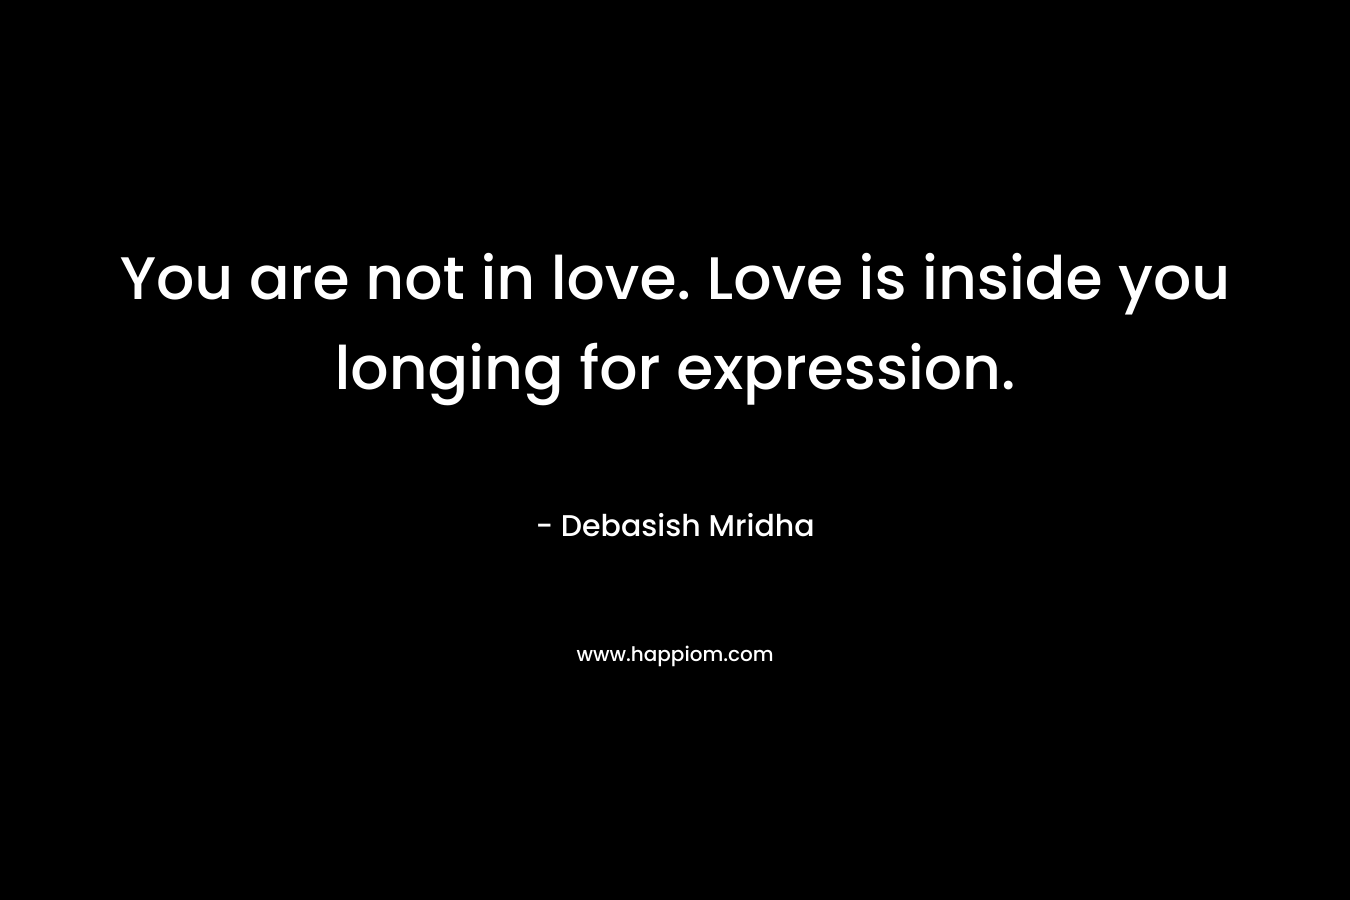 You are not in love. Love is inside you longing for expression. – Debasish Mridha